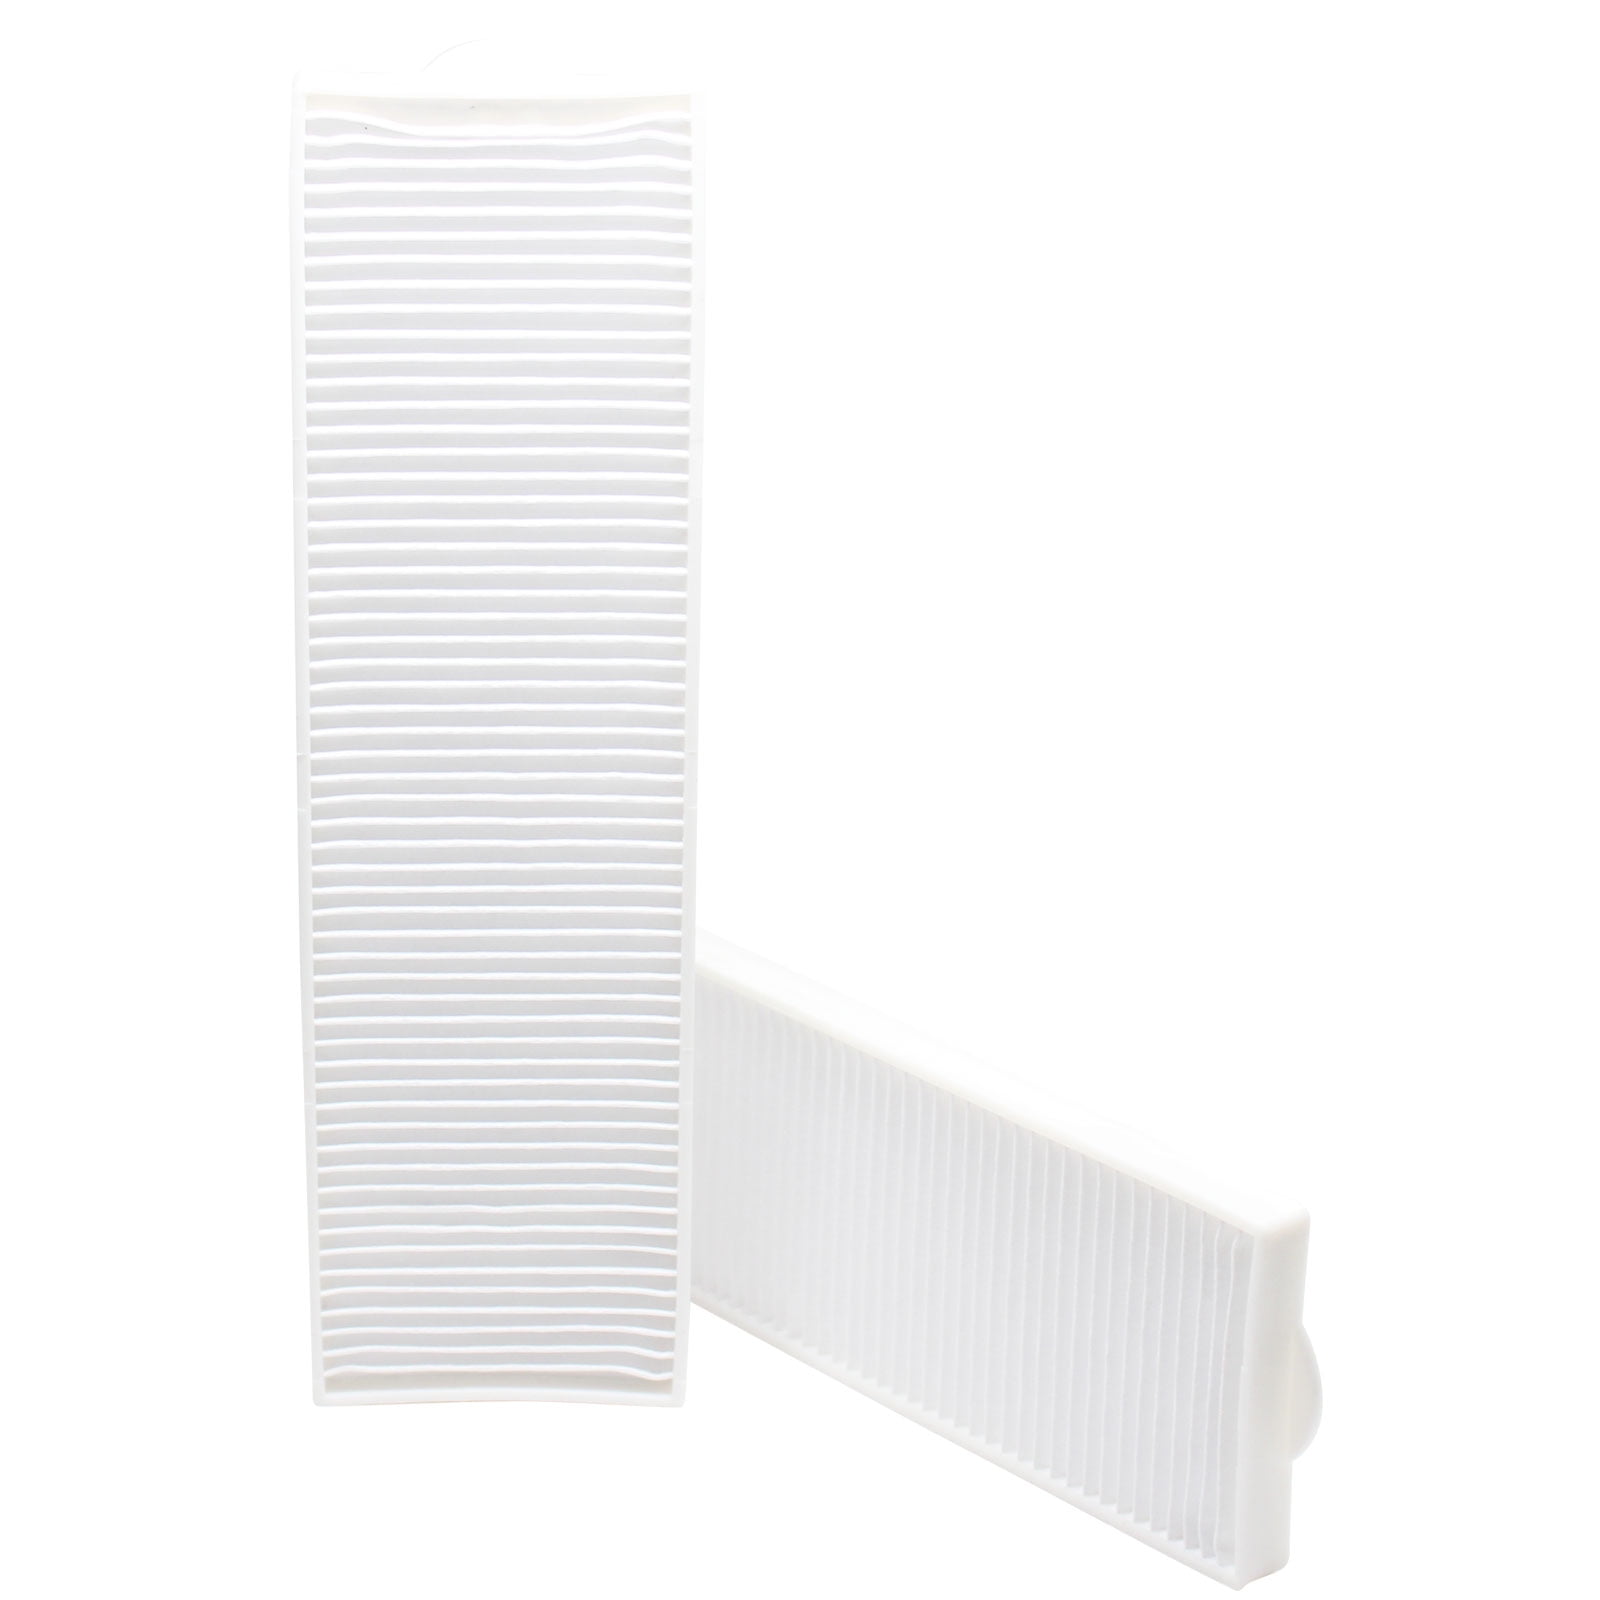 2 HEPA Filter for Bissell Vacuum Style 8 14 Pet Hair Eraser 3920 6750 4104 42209 